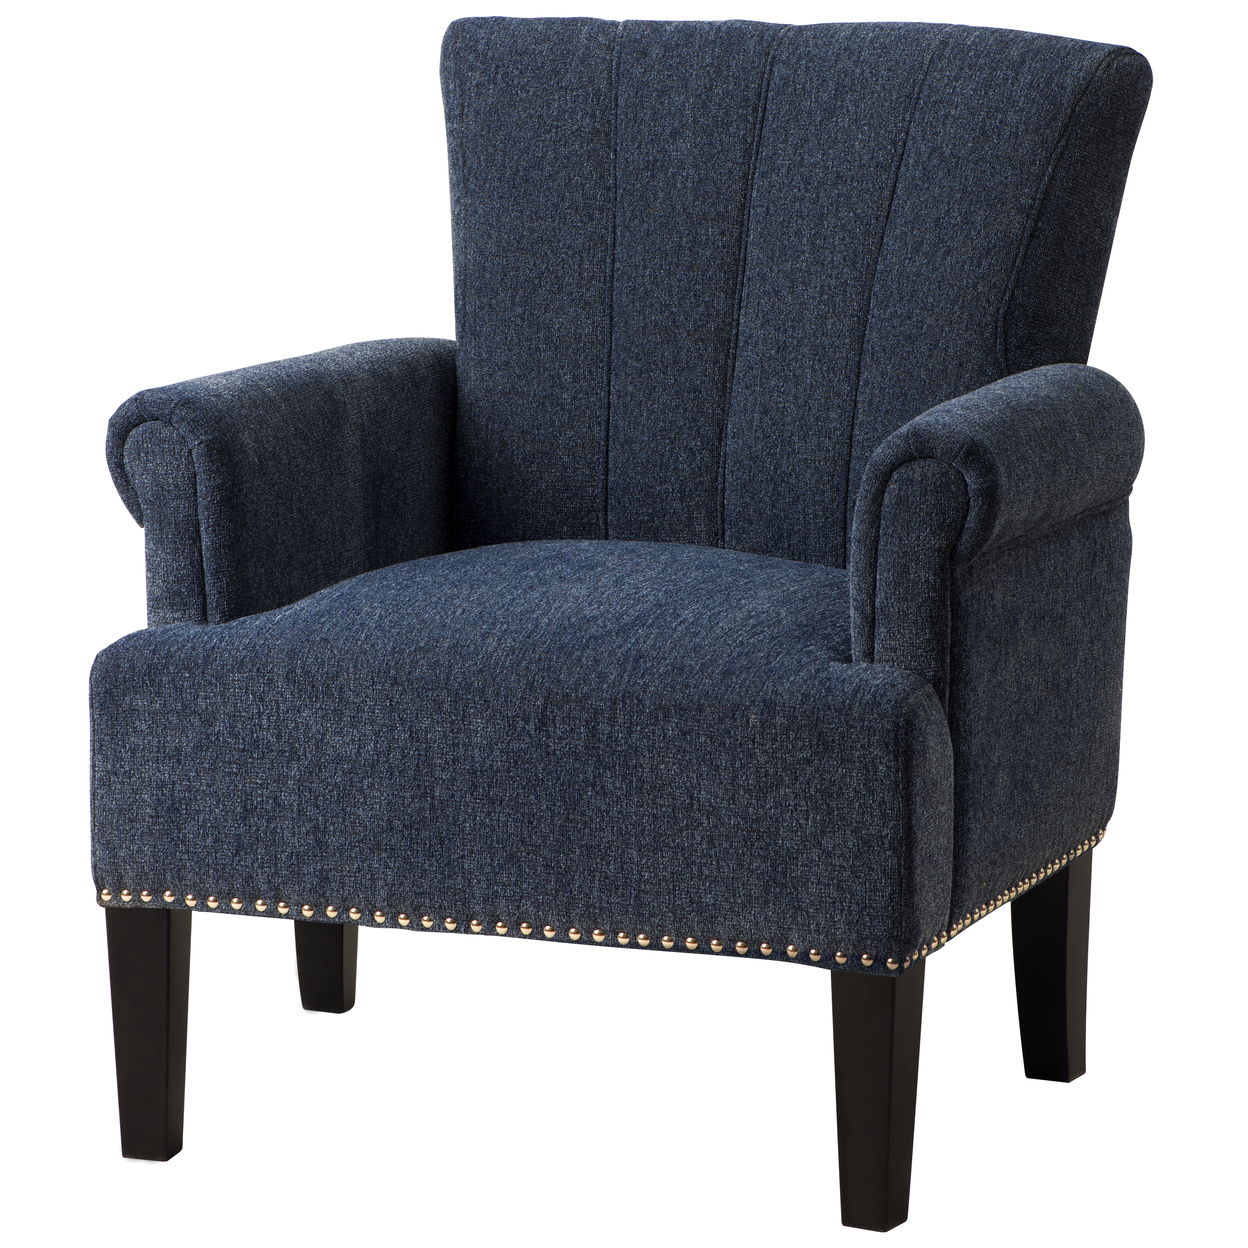 Accent Chair With Fabric Upholstery And Channel Tufting, Navy Blue- Saltoro Sherpi